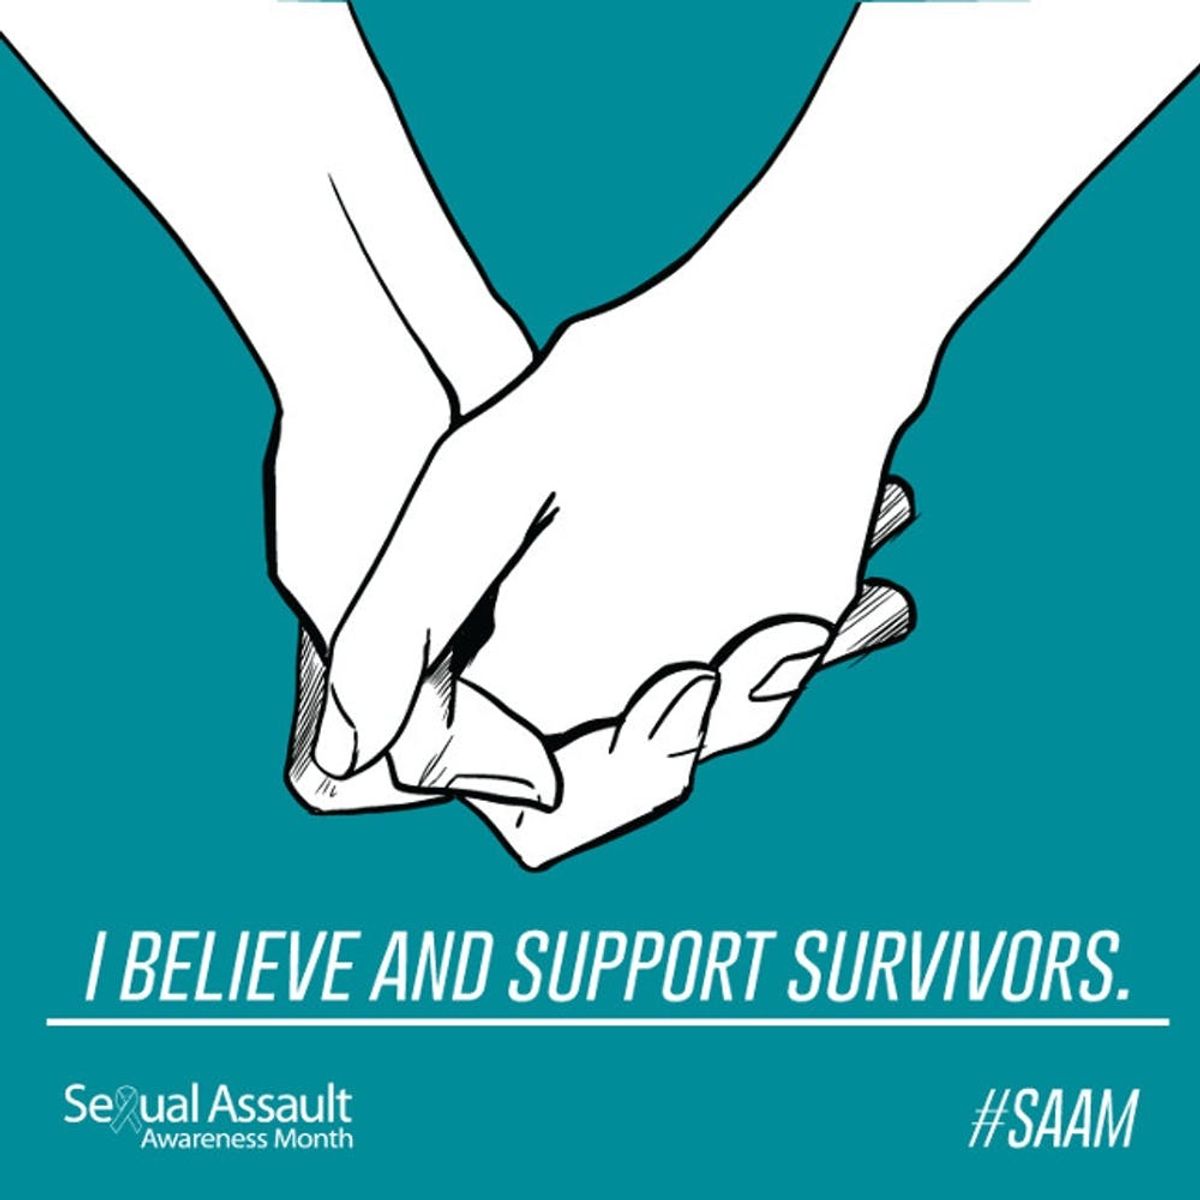 6 Ways to Show Your Support During Sexual Assault Awareness Month